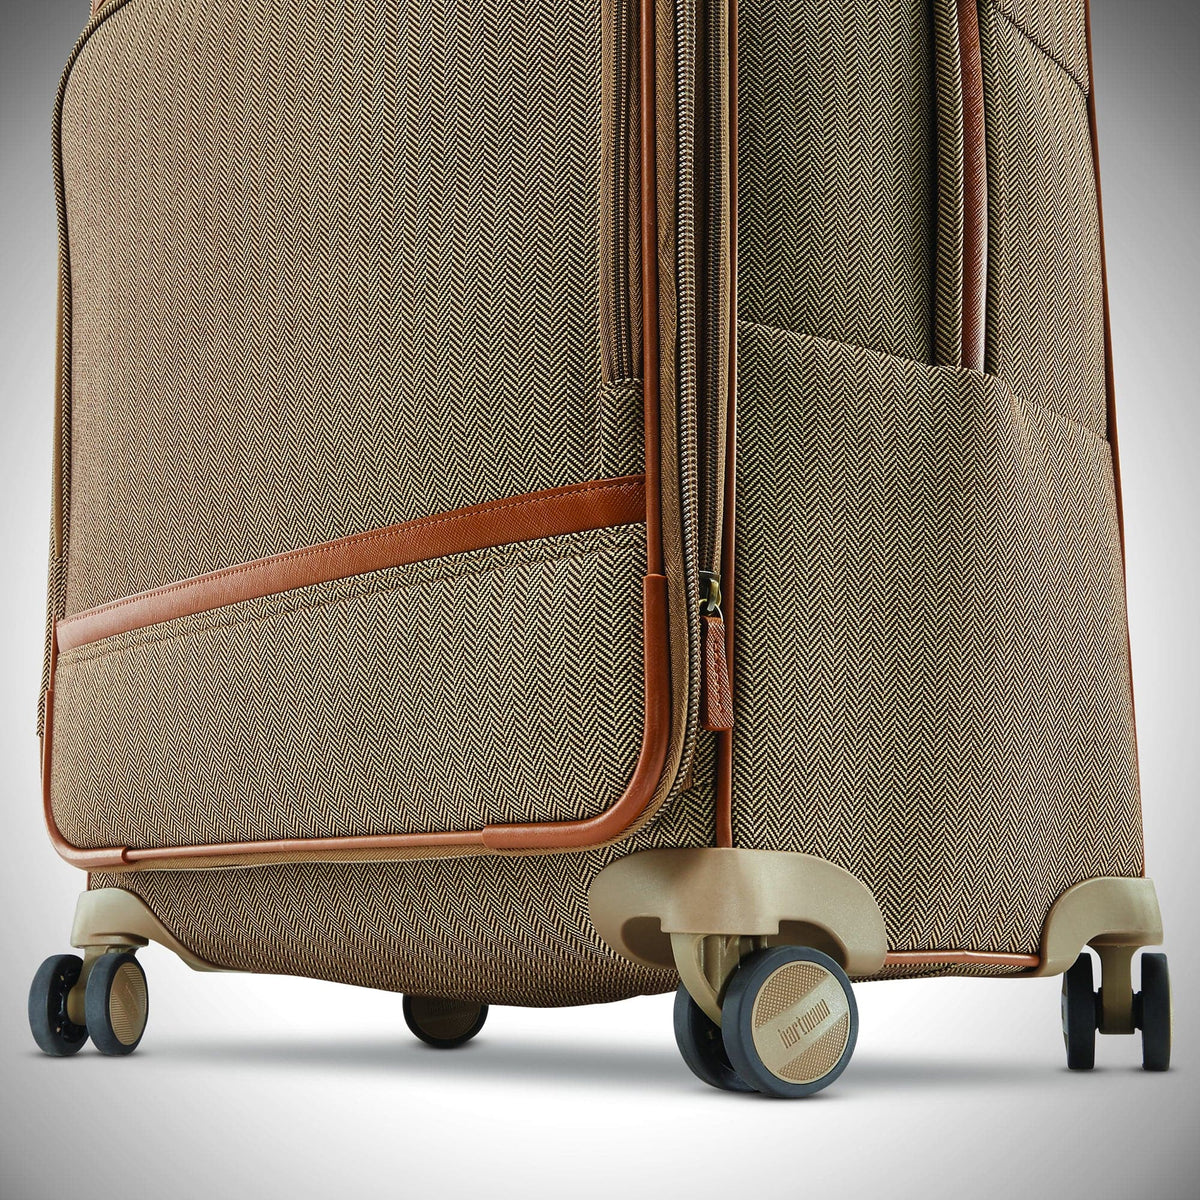 Hartmann Herringbone Deluxe Domestic Carry On Expandable Spinner Luggage